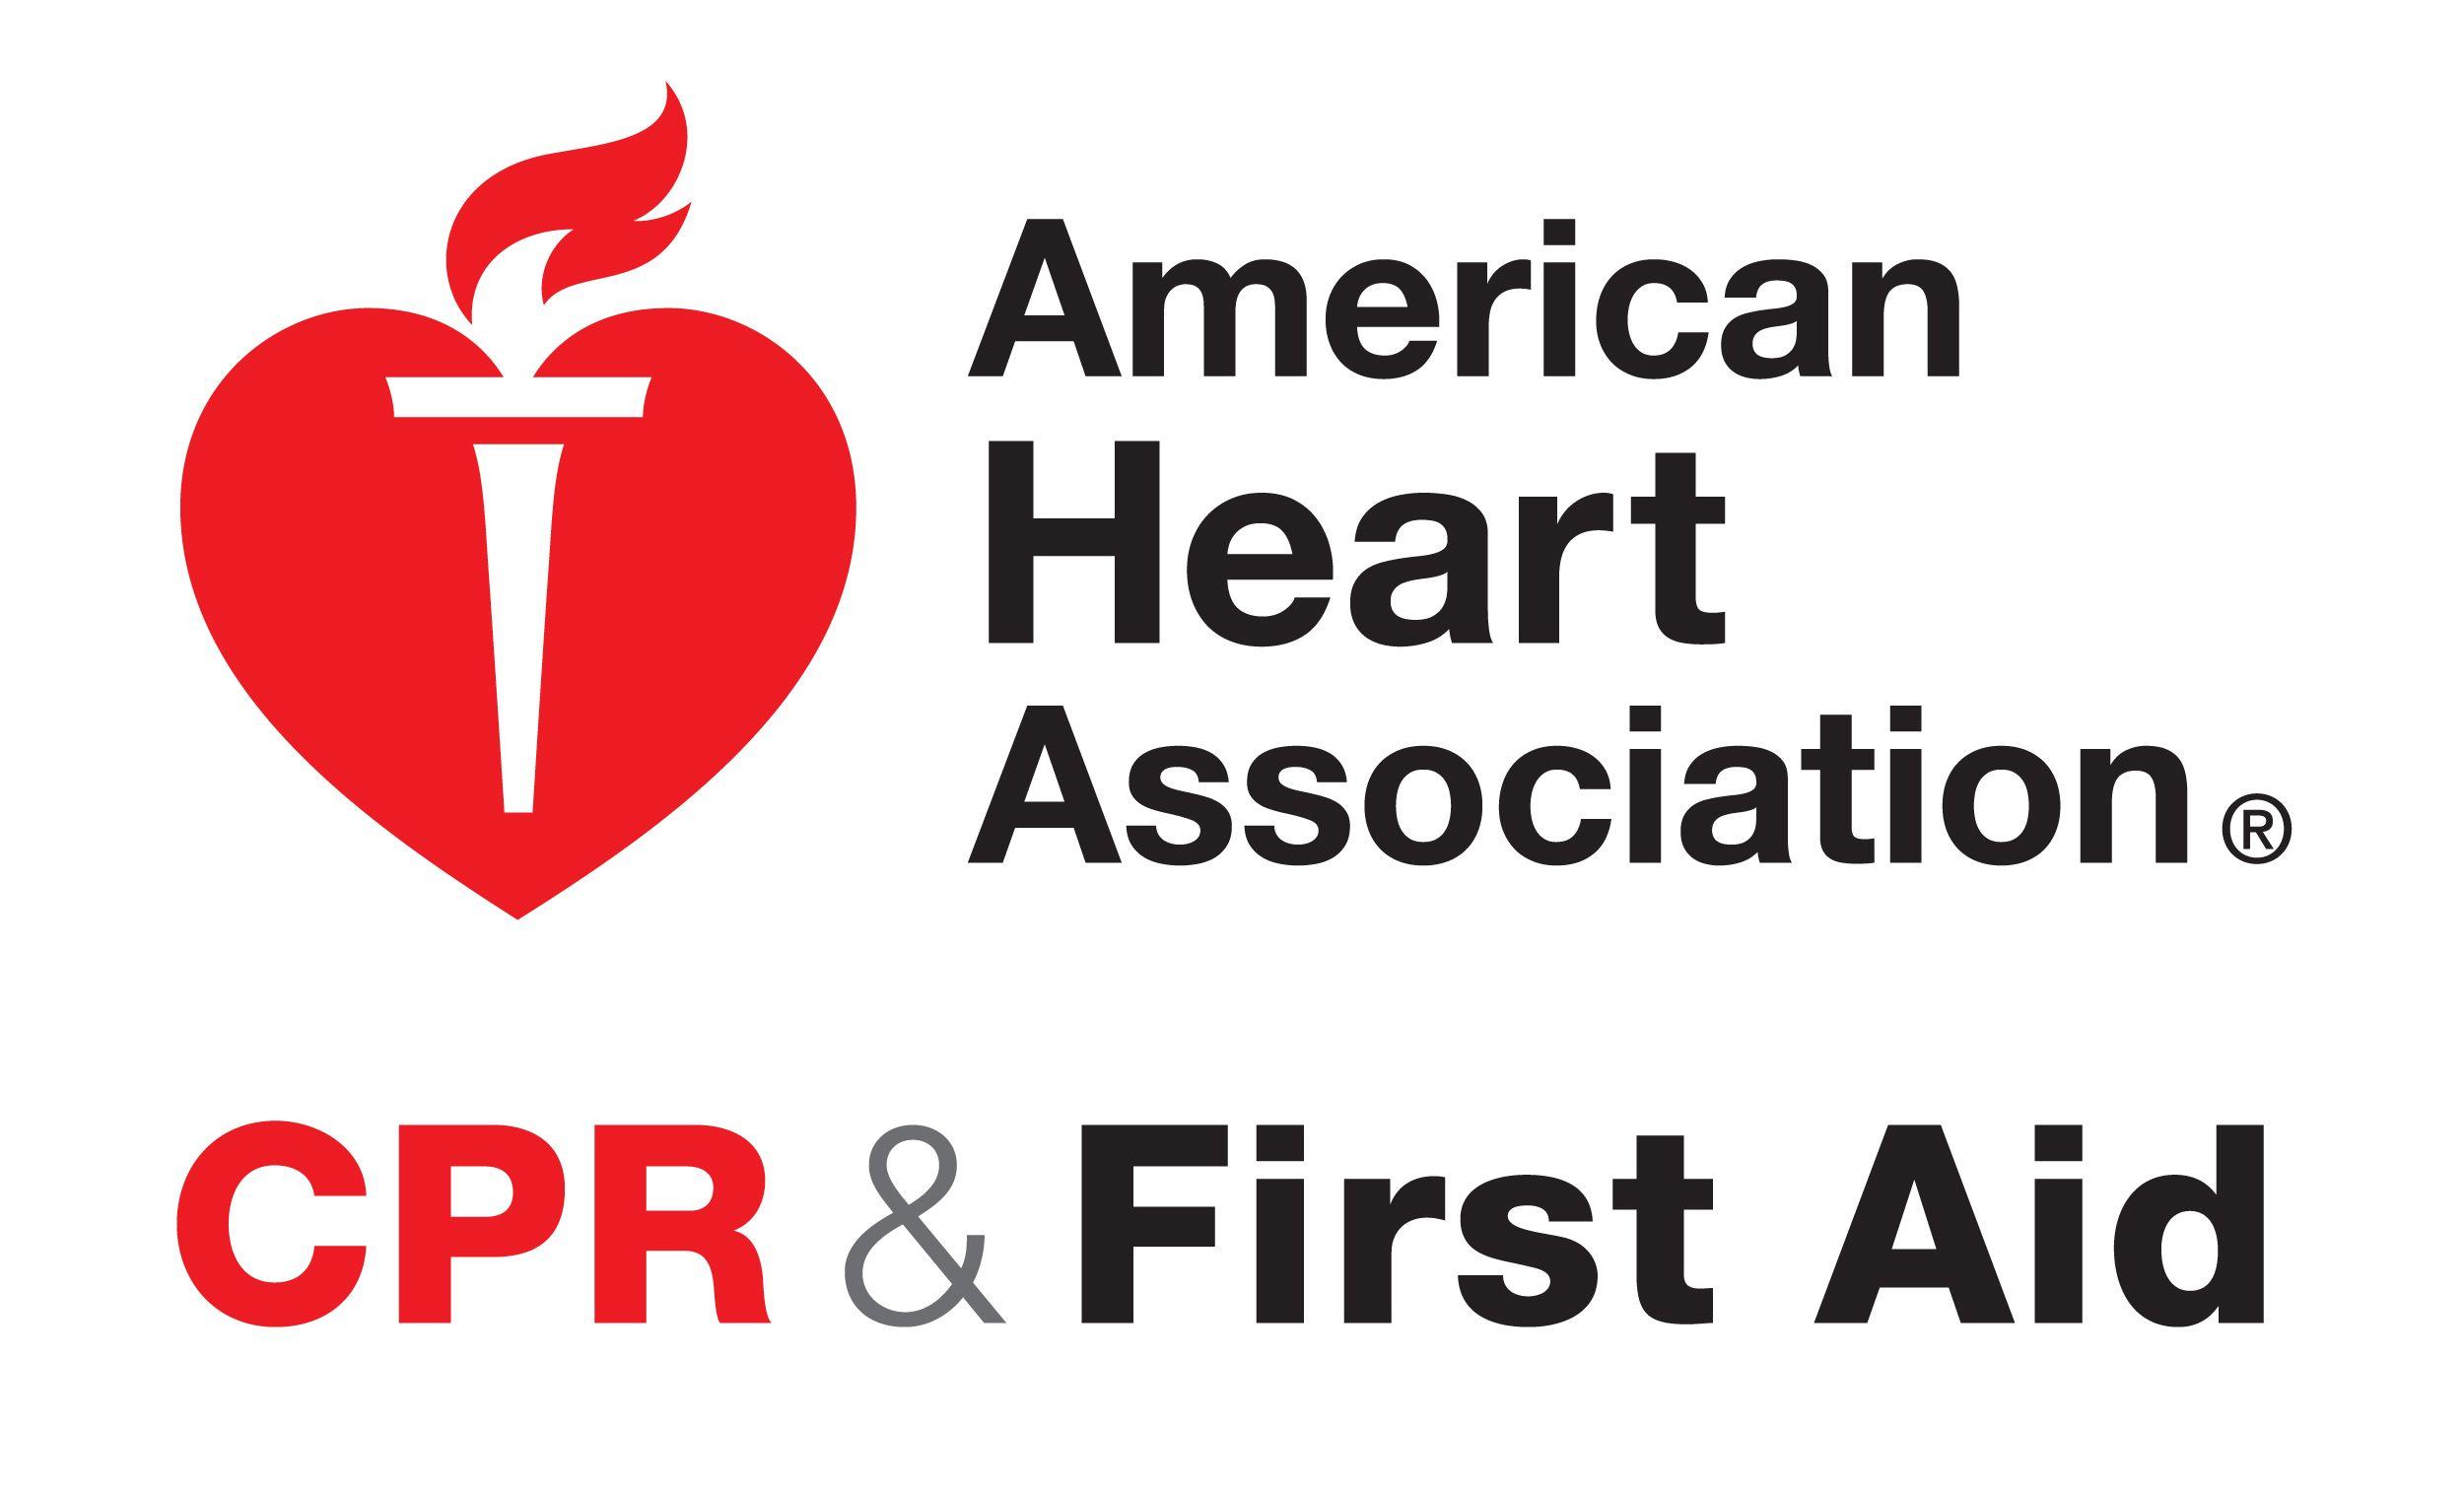 American Heart Association Logo - BLS Life Support CPR AED Hampshire CPR, EMT And First Aid